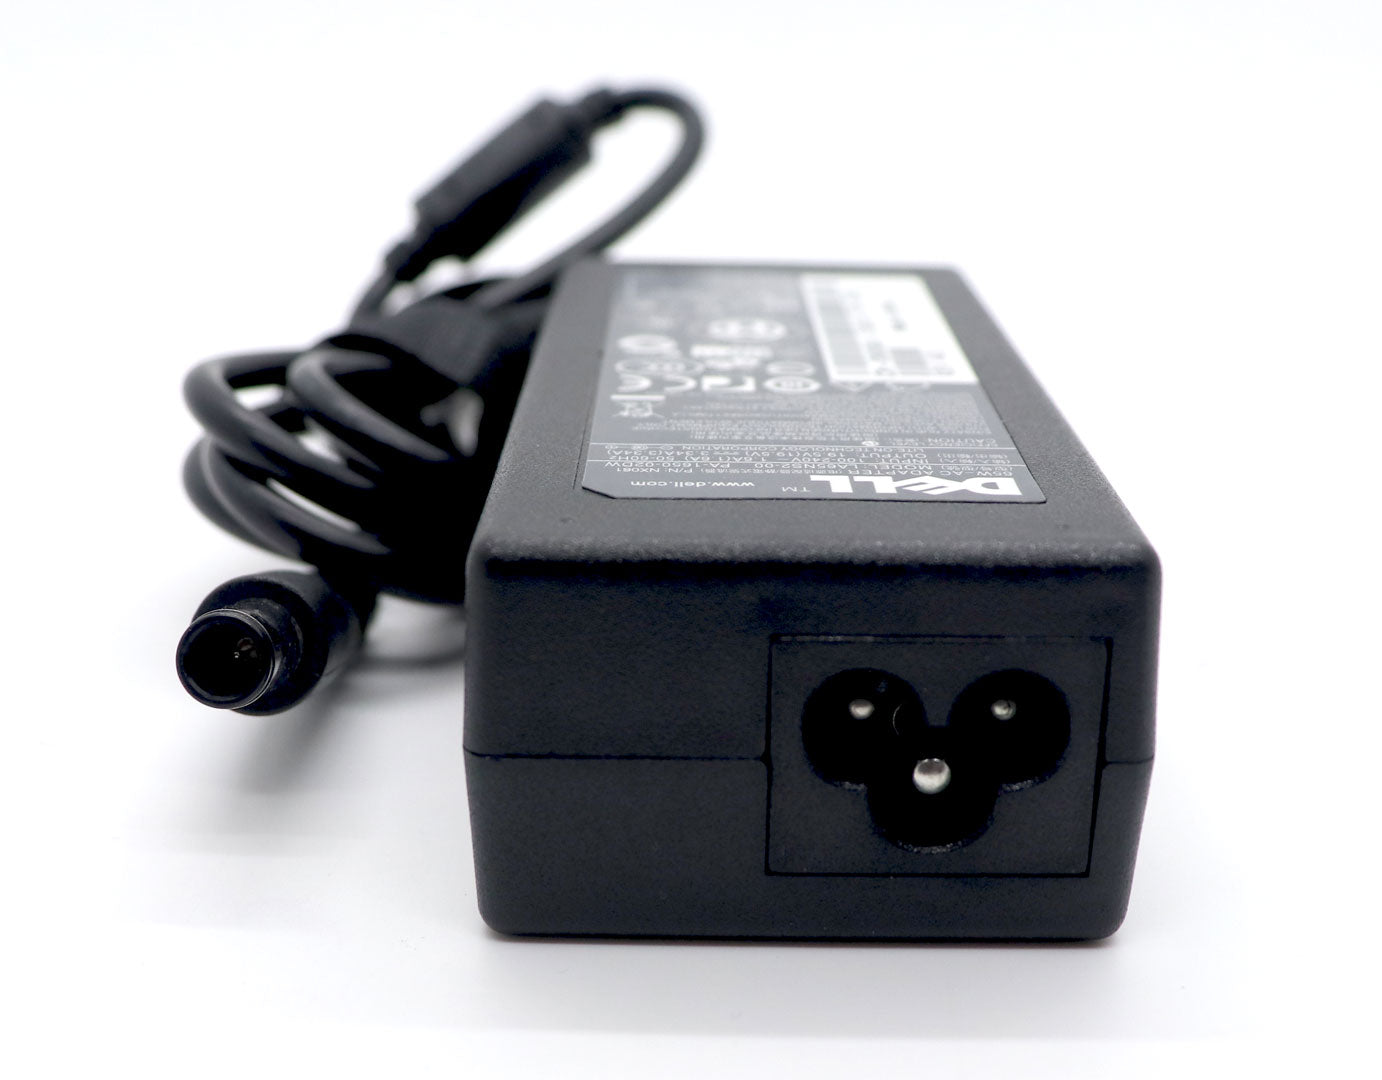 Dell Vostro A860 Original 65W 19.5V 3.34A 7.4mm Pin Laptop Adapter Charger